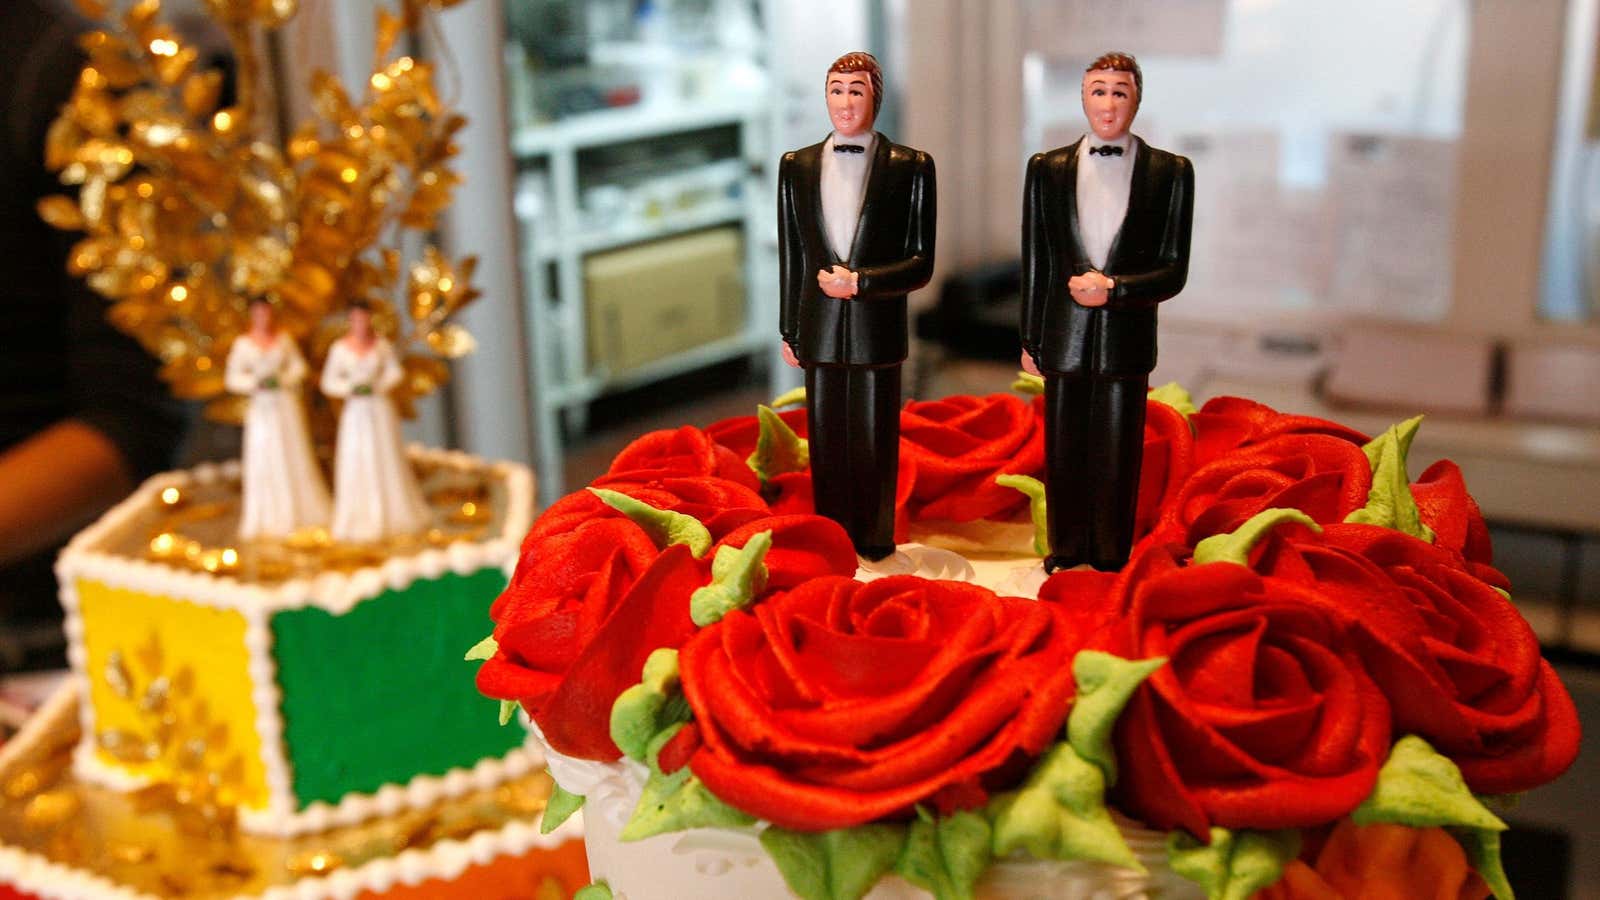 Bride and groom figurines are on display on wedding cakes at Cake and Art bakery in West Hollywood, California June 4, 2008. A California Supreme…